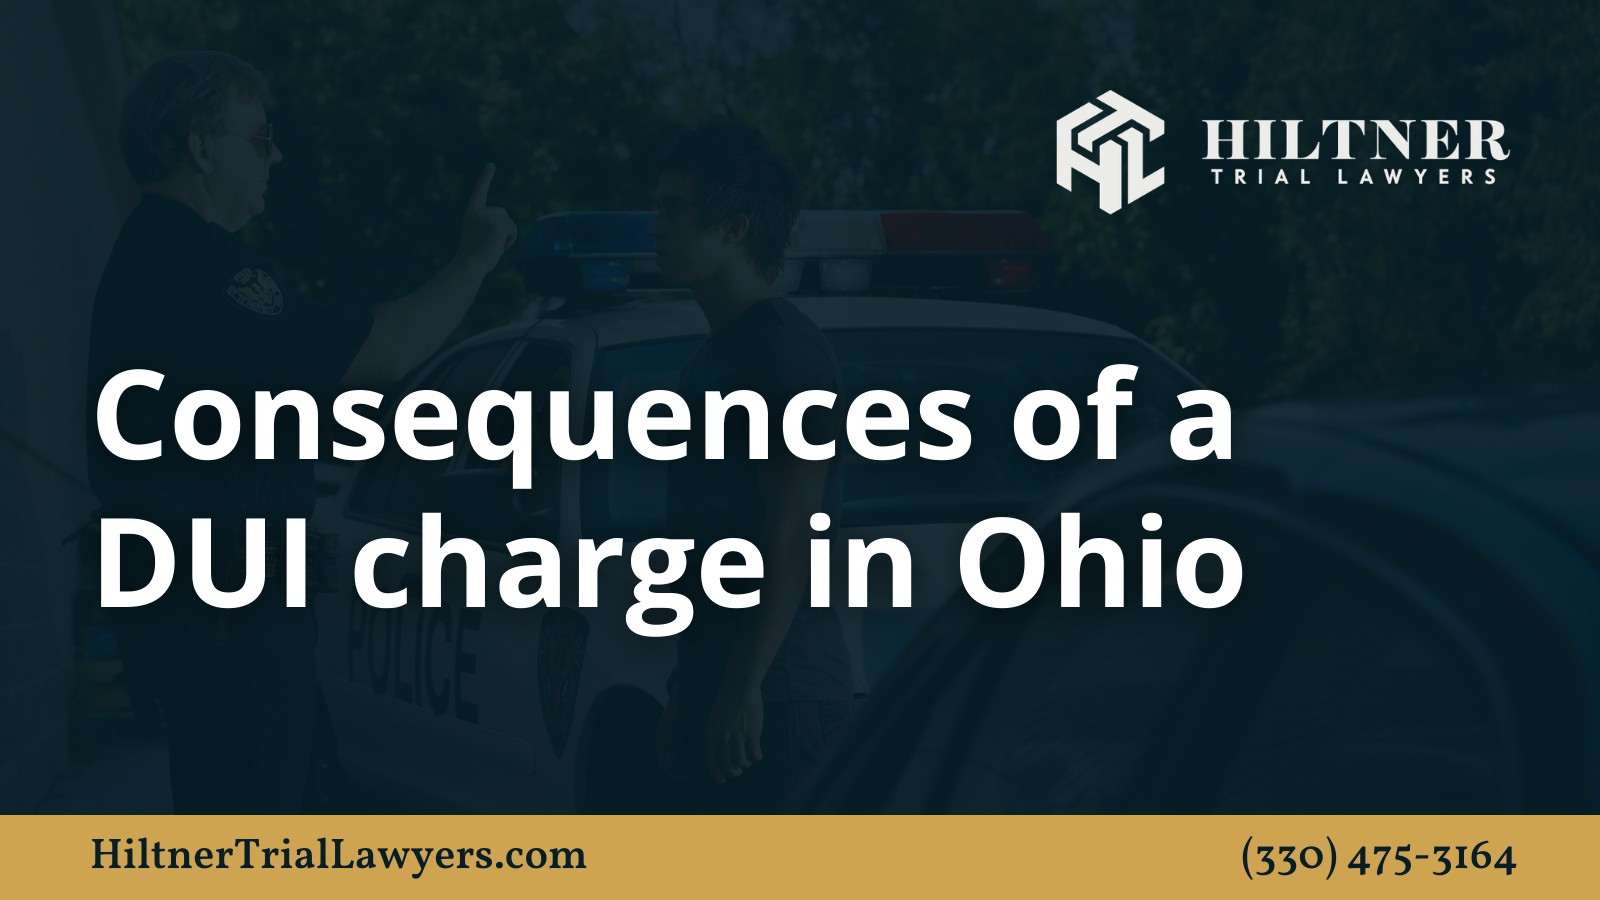 Consequences of a DUI charge in Ohio - Hiltner Trial Lawyers Ohio - max hiltner